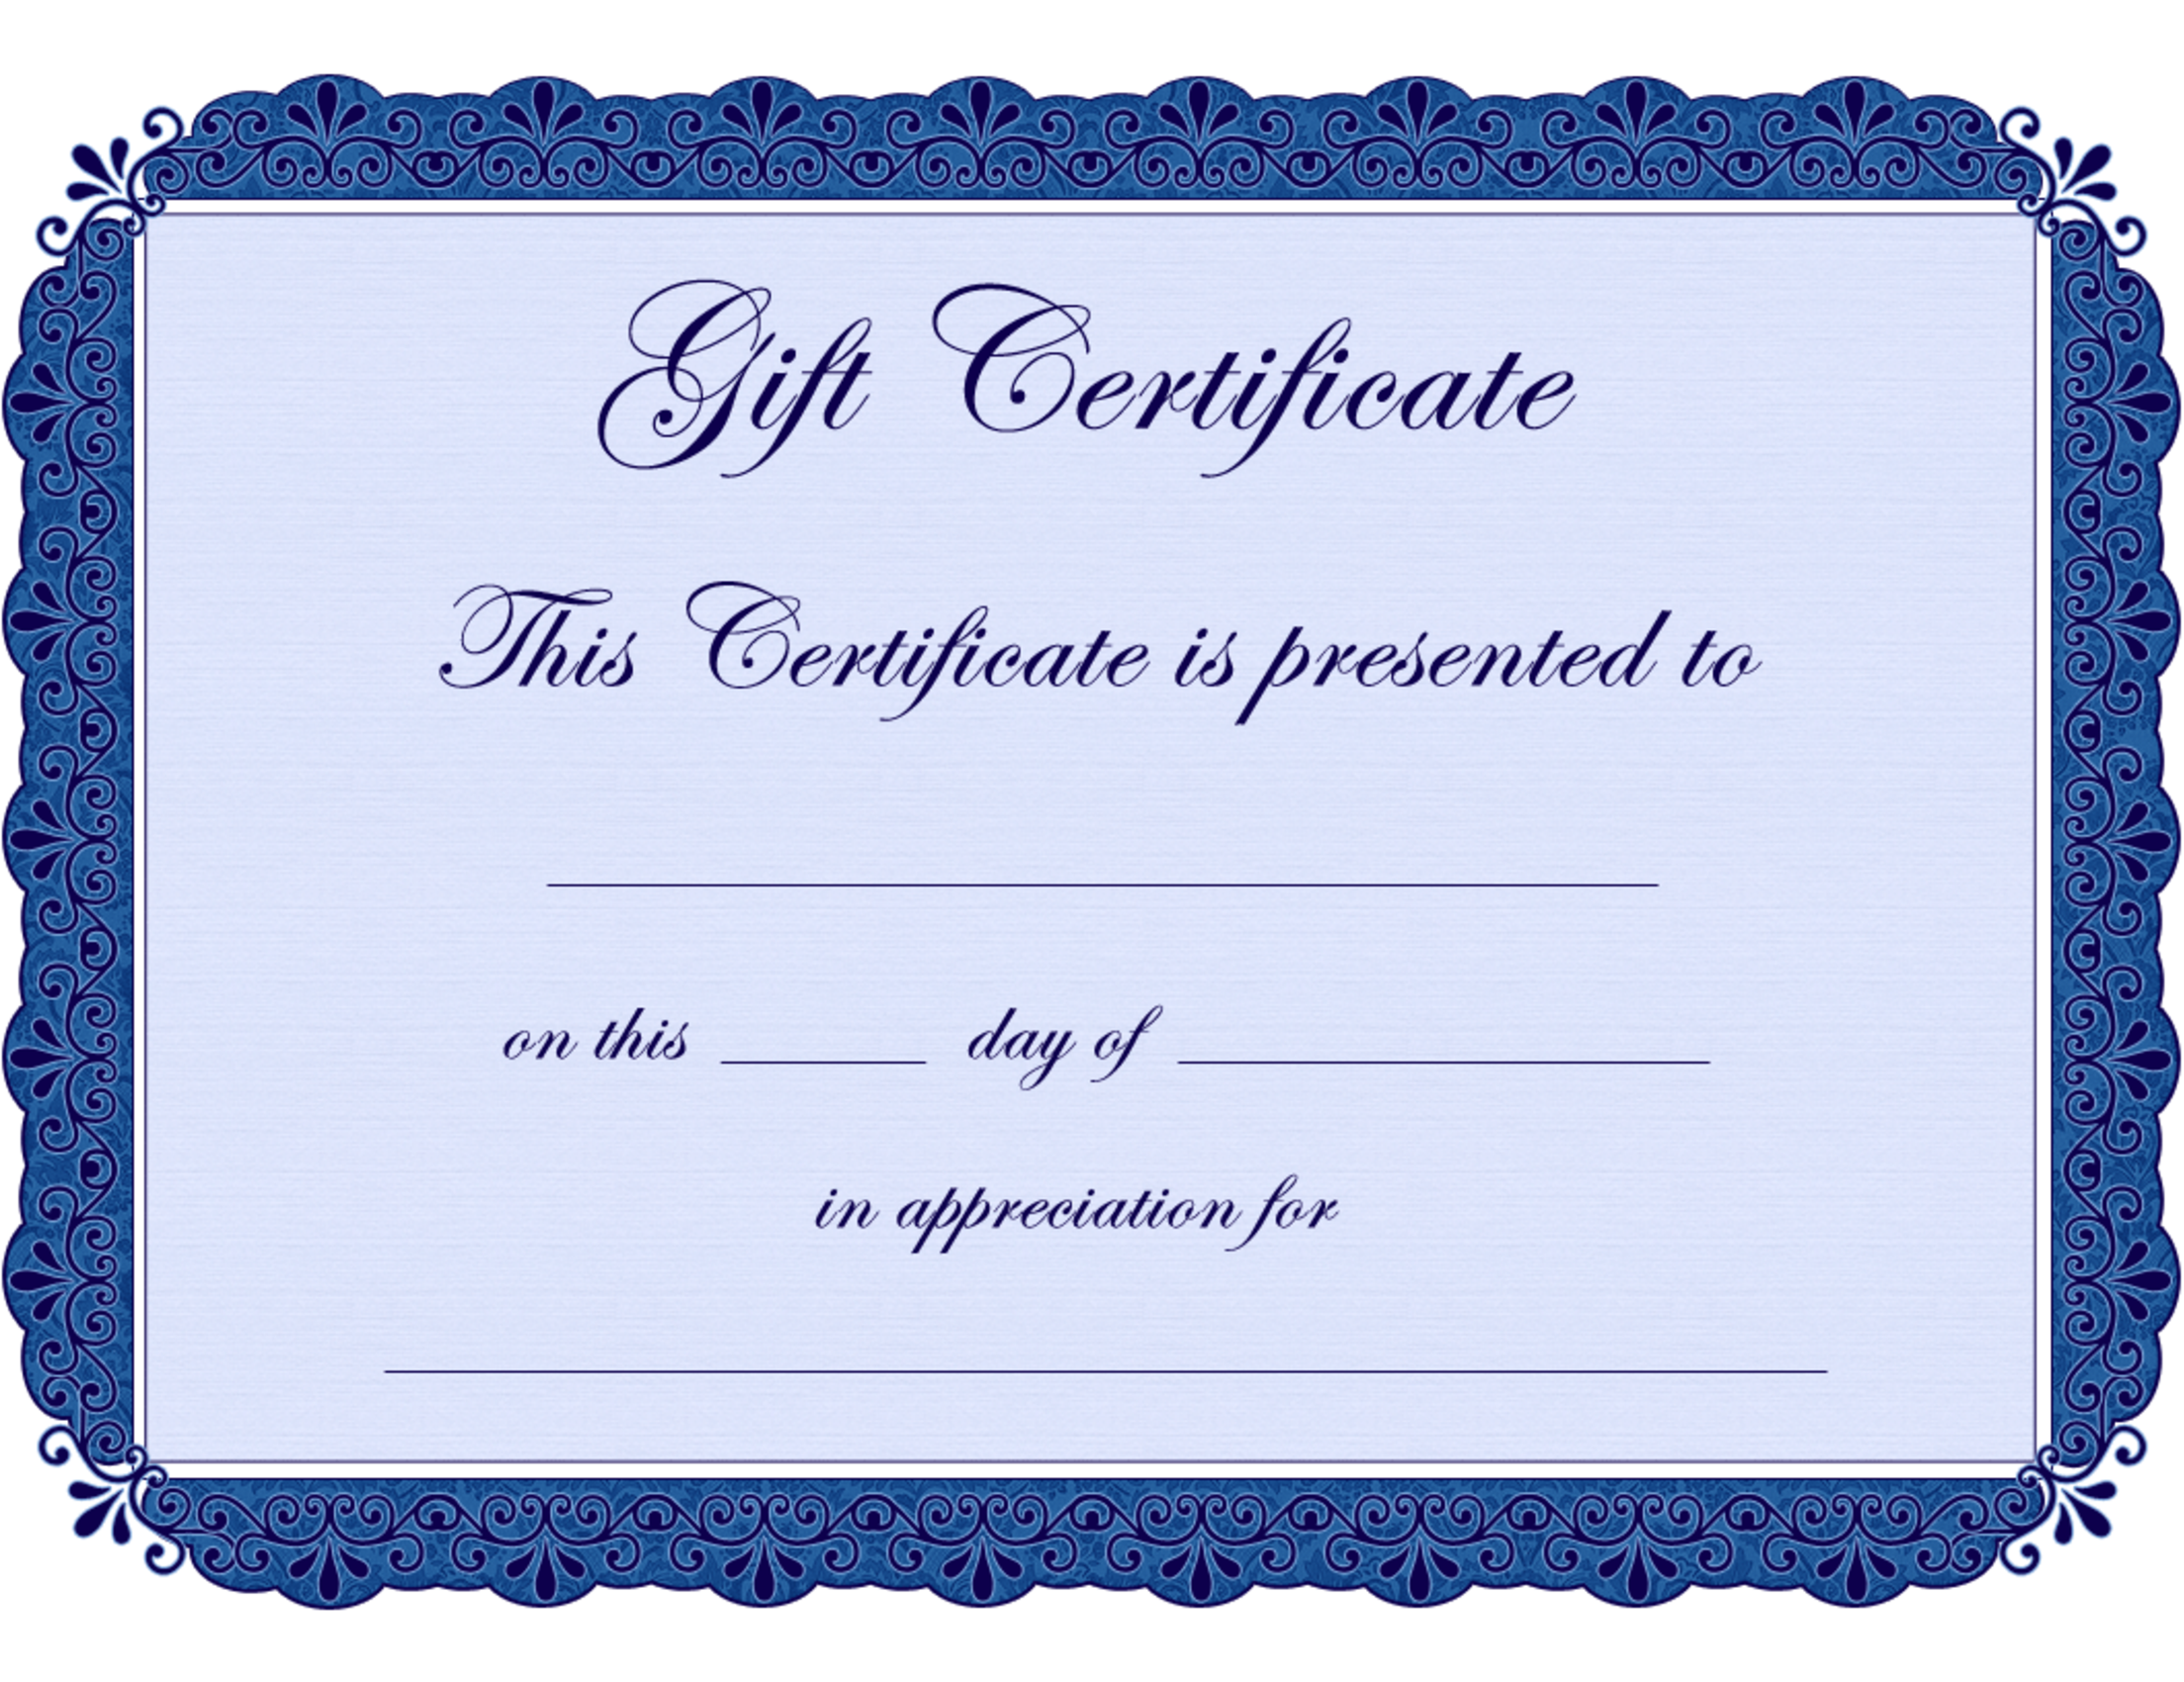 clipart gift certificate template - photo #1